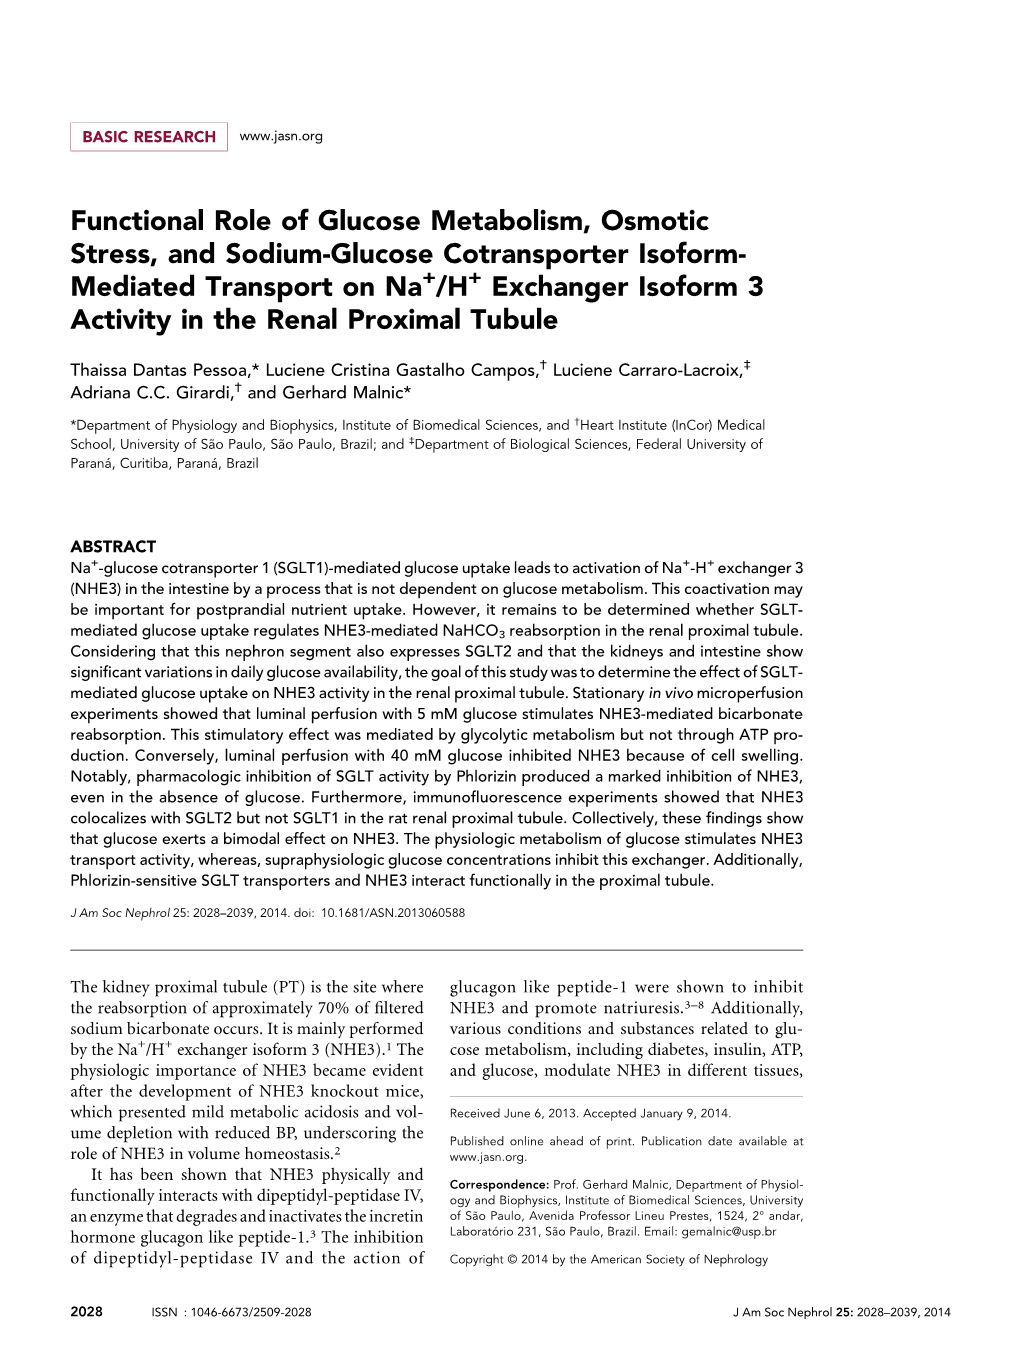 Functional Role of Glucose Metabolism, Osmotic Stress